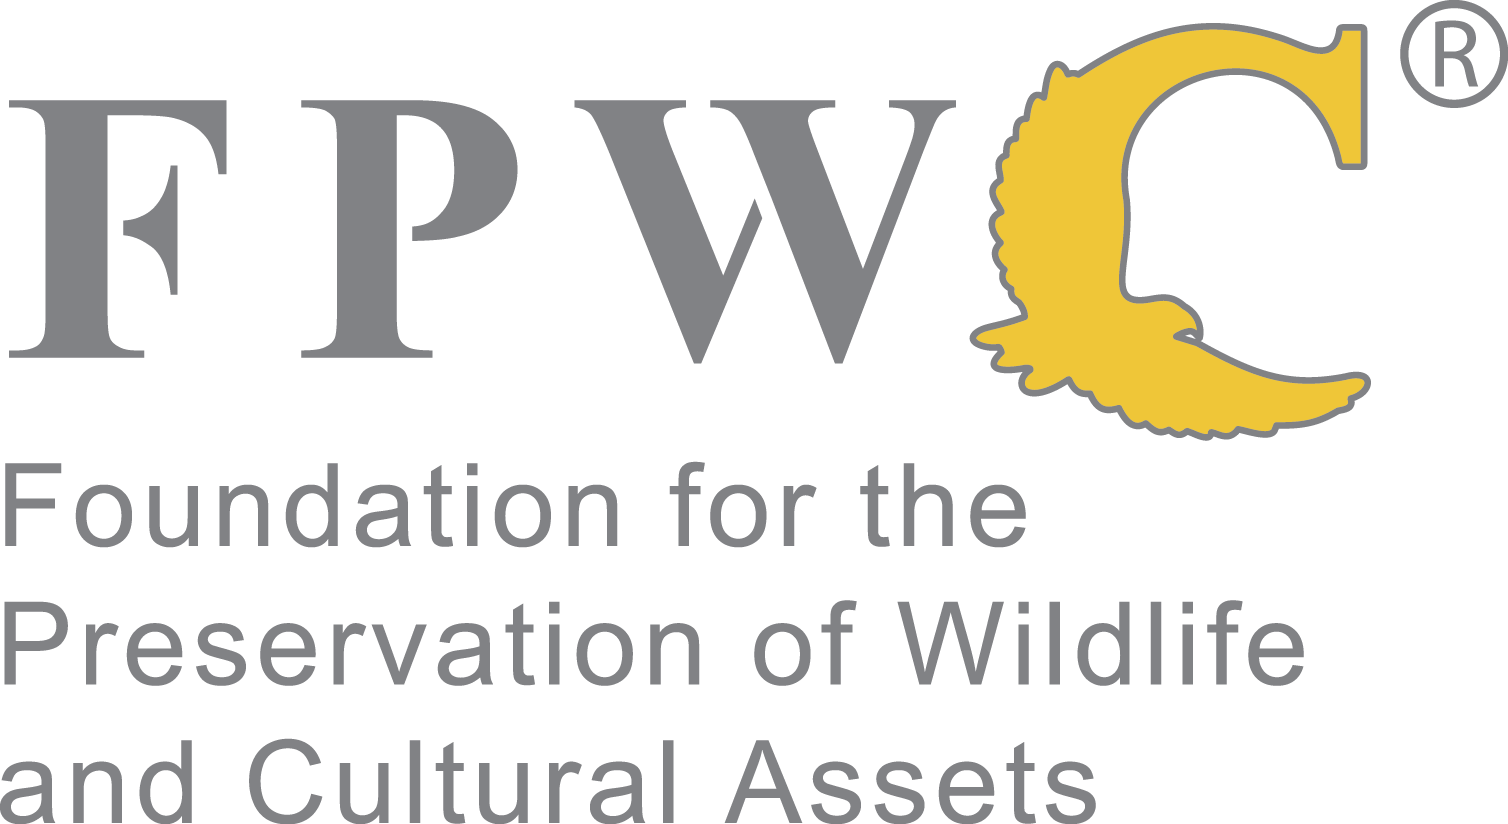 Foundation for the Preservation of Wildlife and Cultural Assets